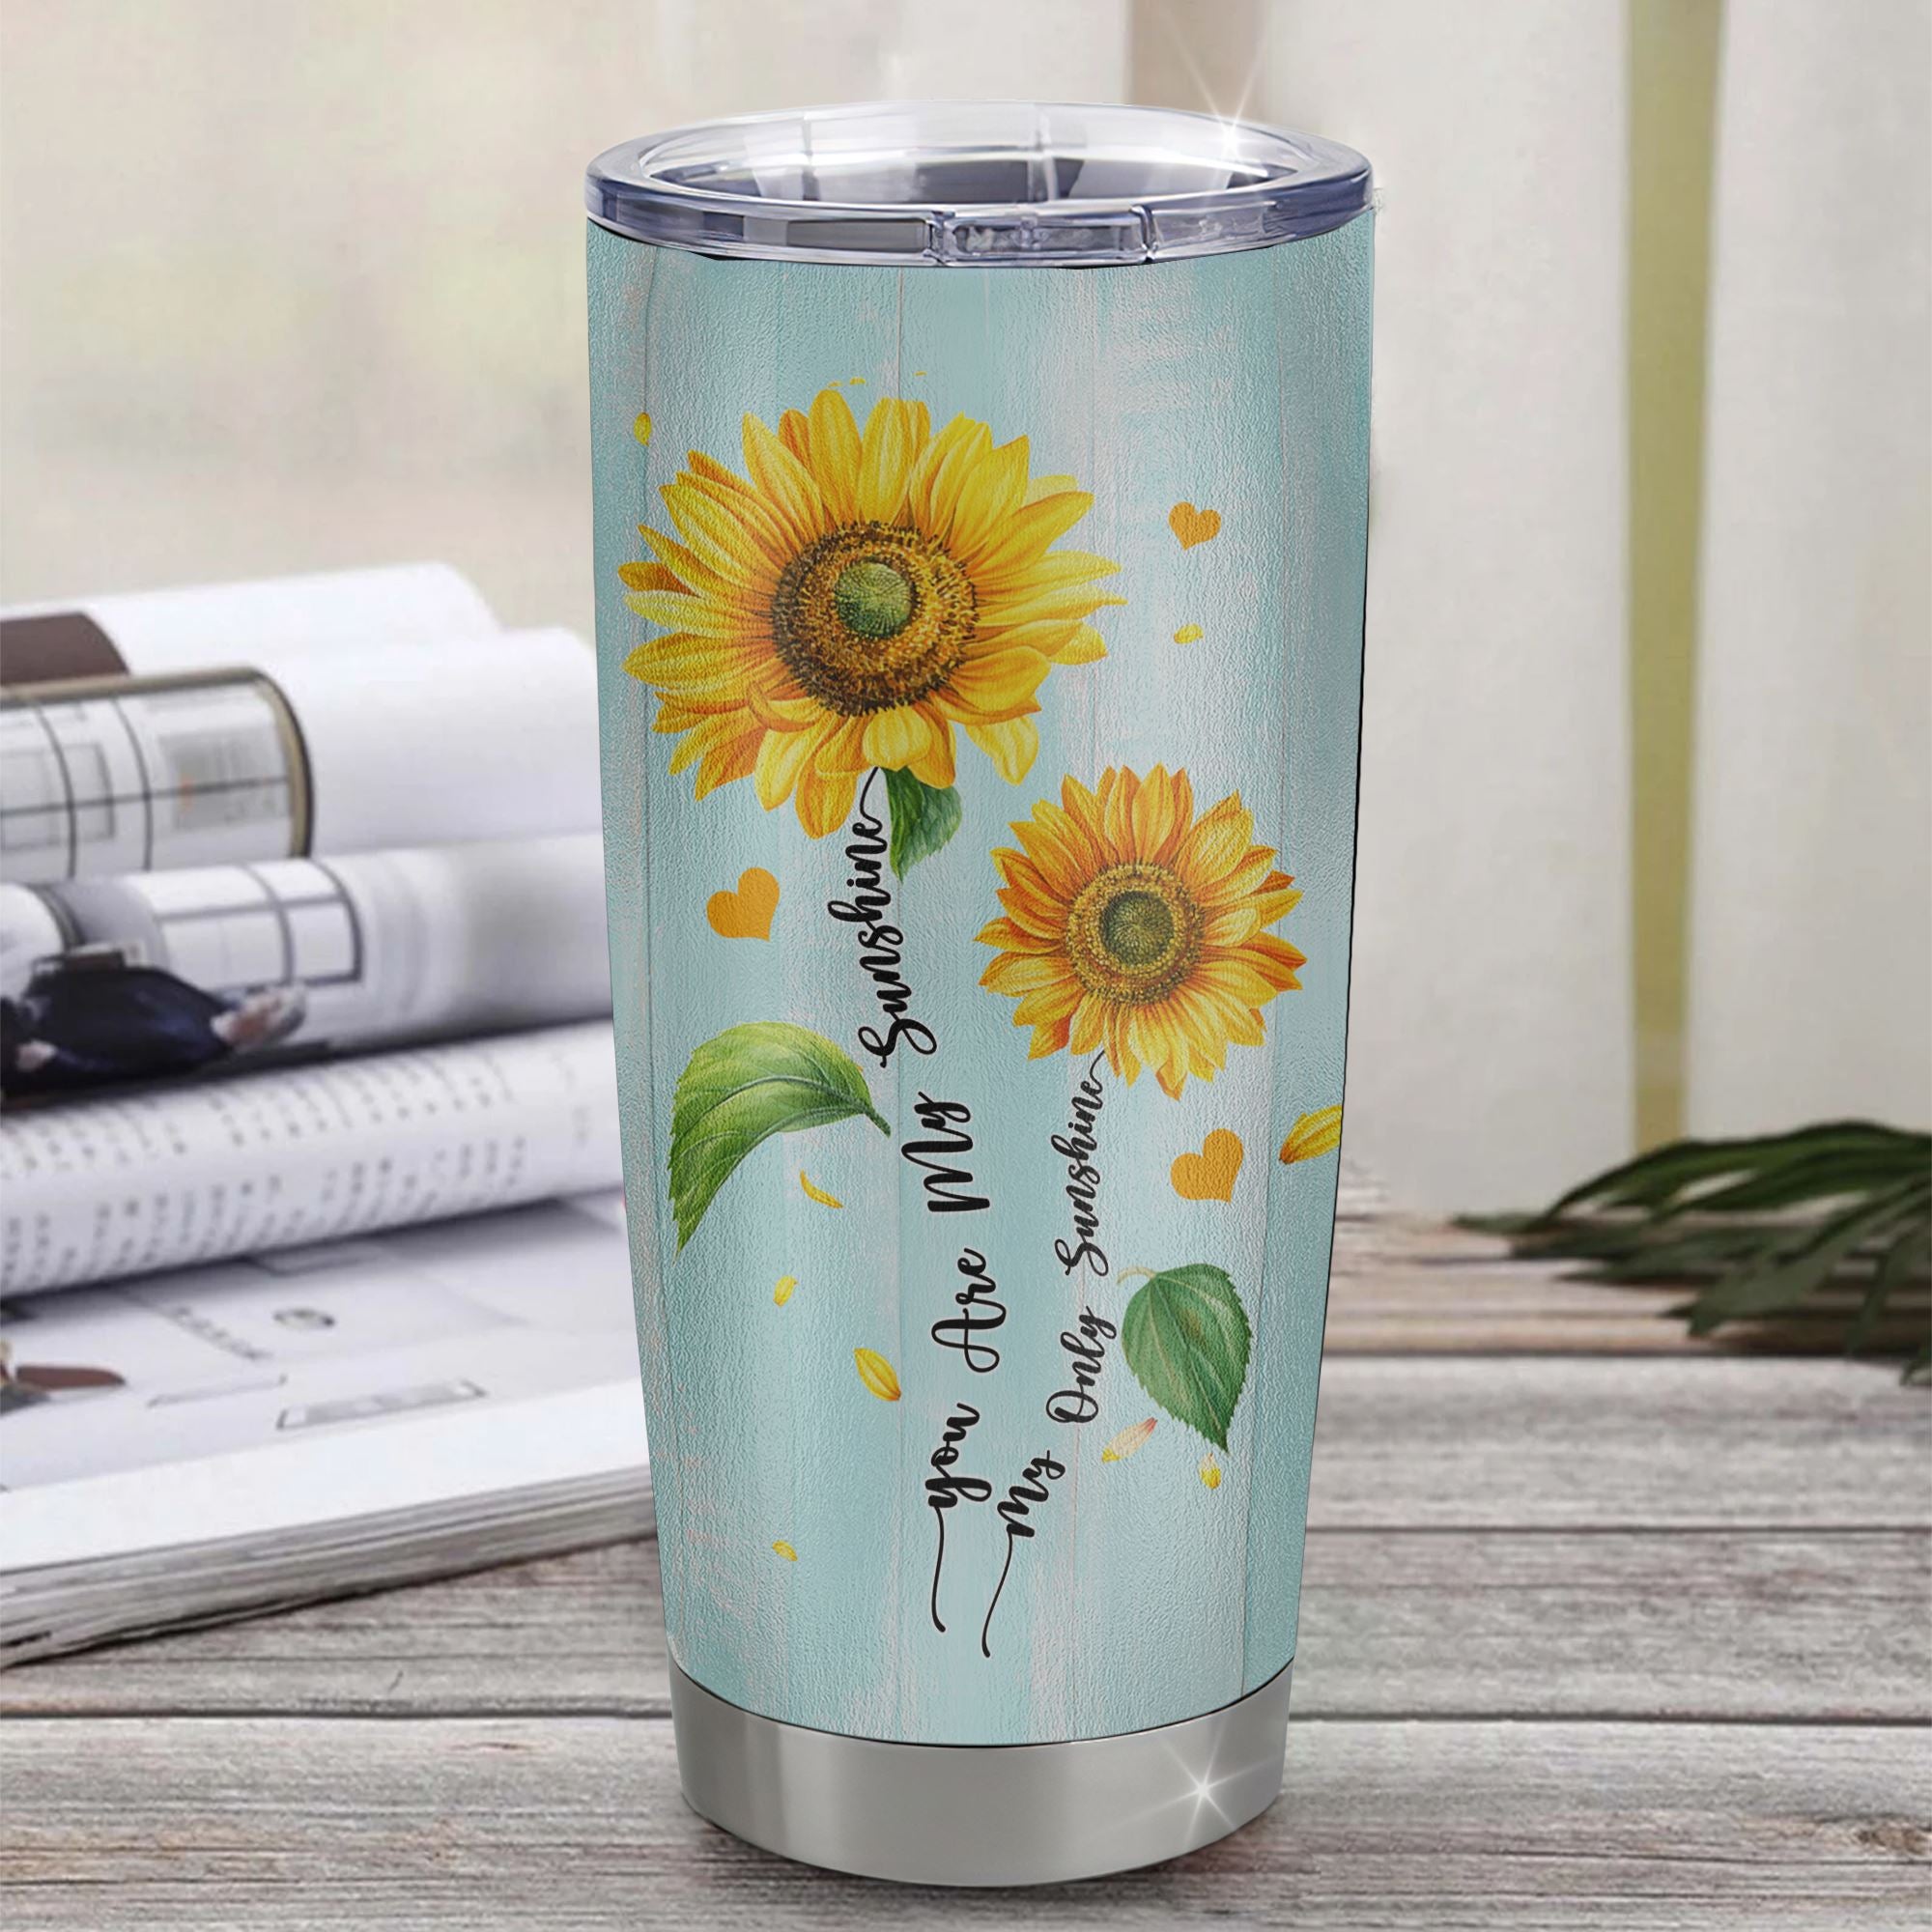 Personalized_To_My_Granddaughter_From_Grandma_Stainless_Steel_Tumbler_Cup_Never_Forget_That_I_Love_You_Sunflower_Granddaughter_Birthday_Christmas_Travel_Mug_Tumbler_mockup_1.jpg